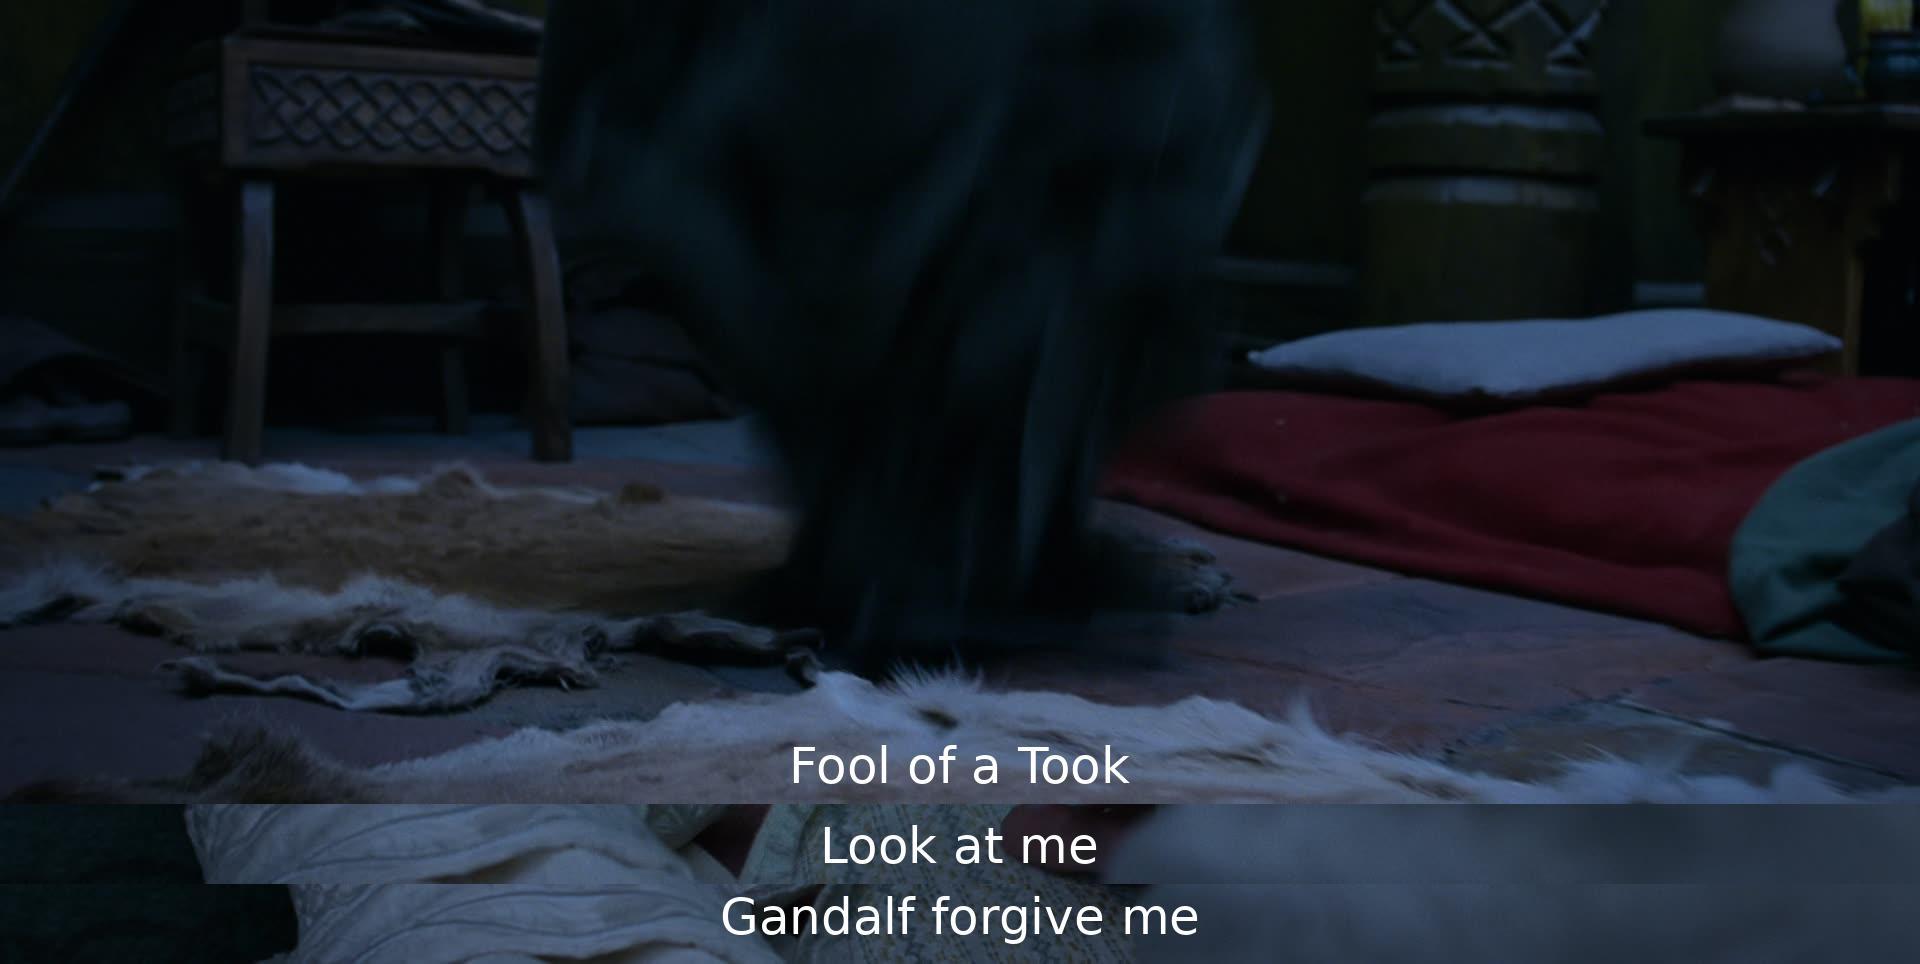 A character apologizes to Gandalf for a mistake, acknowledging foolishness as Gandalf looks at him. The character seeks forgiveness, showing remorse for their actions.